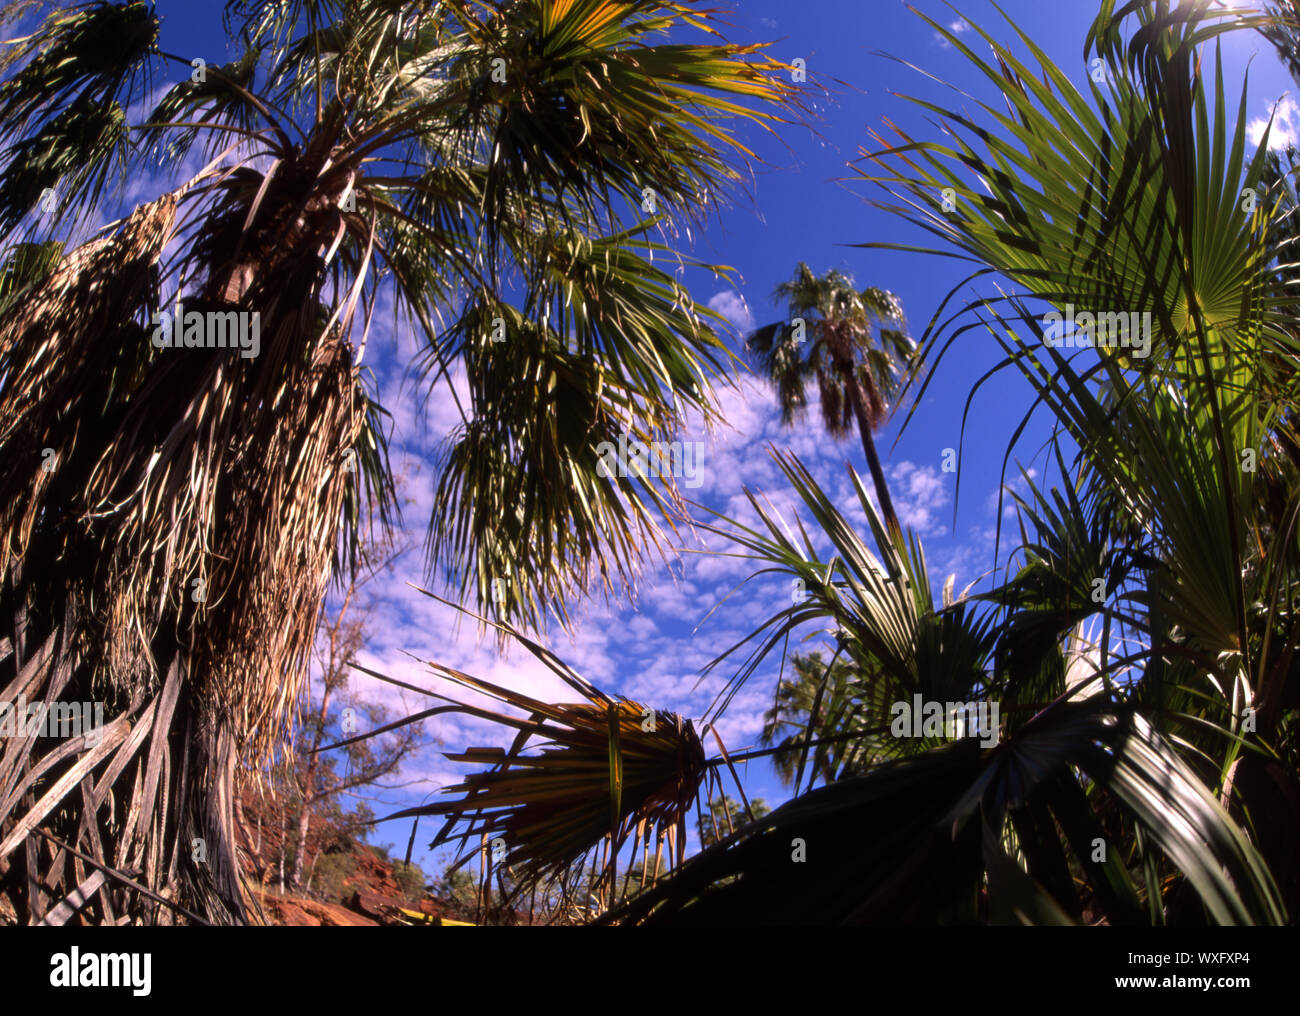 PALMS (LIVISTONA) IN PALM VALLEY, NORTHERN TERRITORY, AUSTRALIA. PALM VALLEY IS LOCATED IN THE DESERT OASIS OF FINKE GORGE NATIONAL PARK. Stock Photo